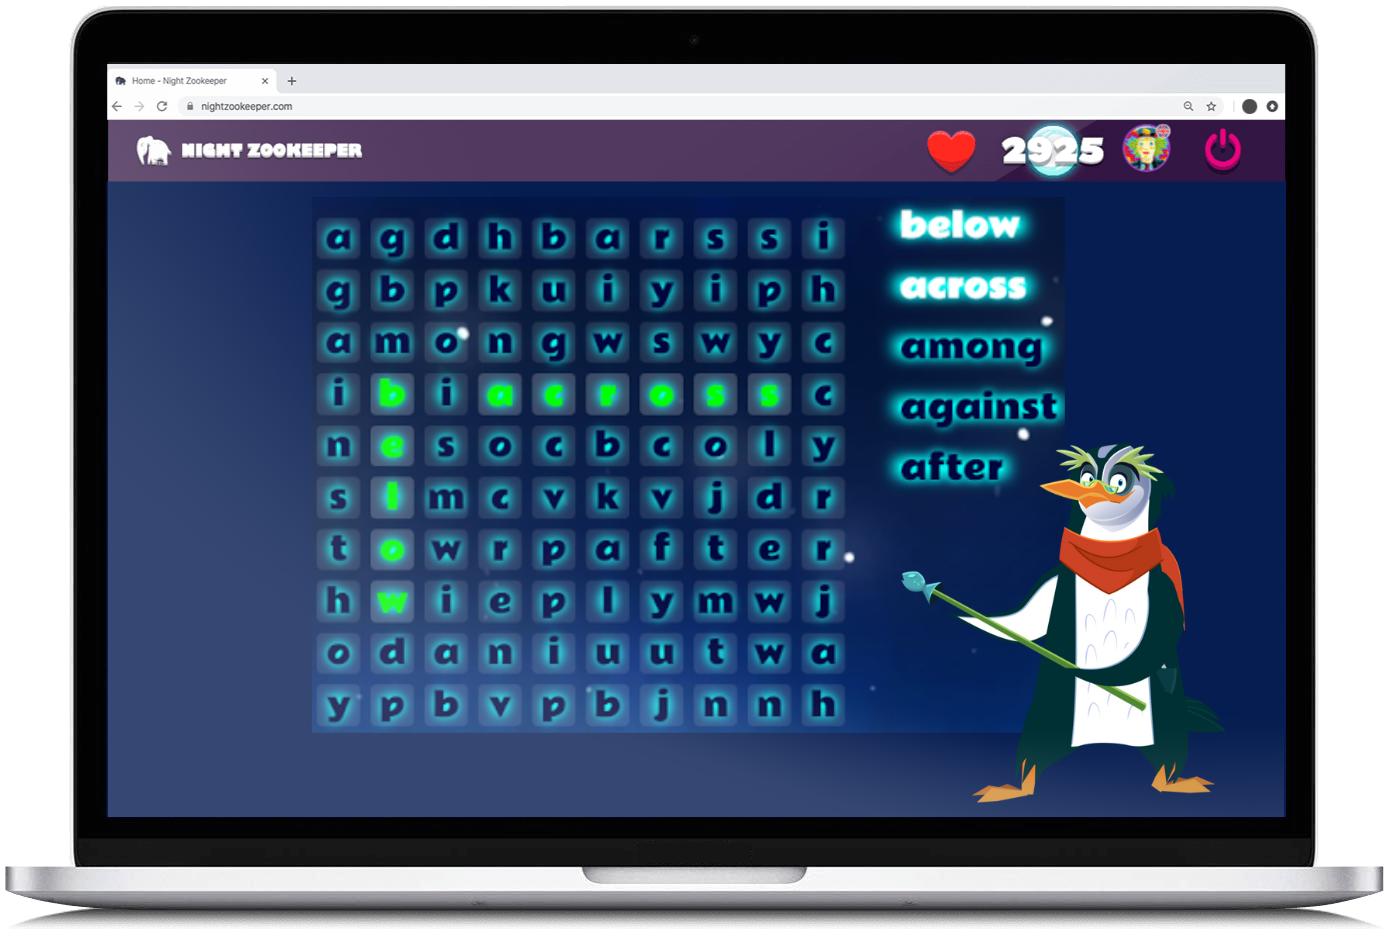 Preposition word search challenge on Nightzookeeper.com, displayed on laptop screen.